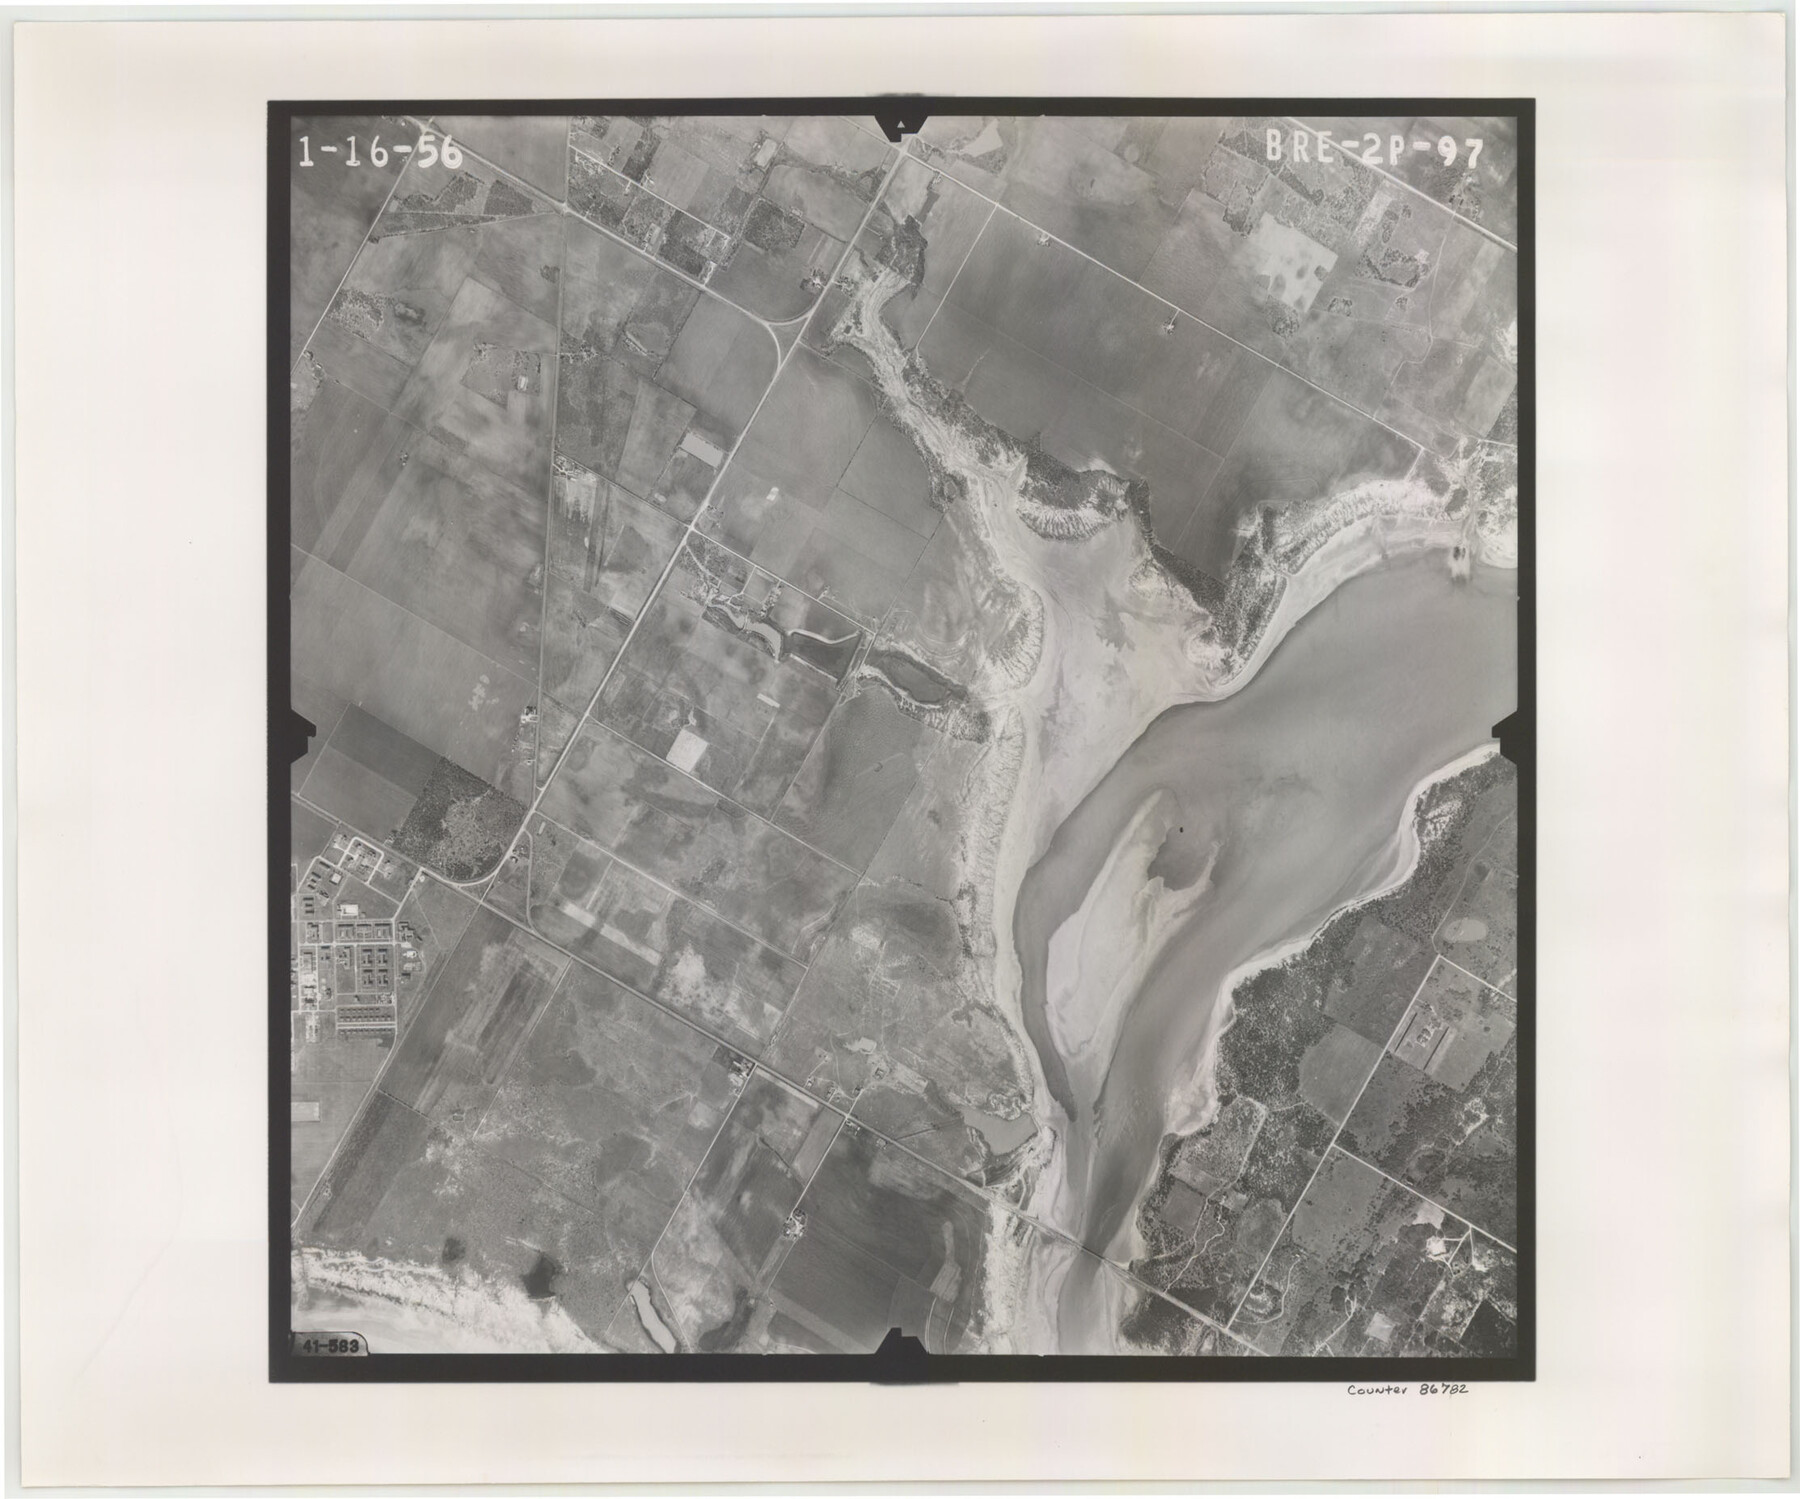 86782, Flight Mission No. BRE-2P, Frame 97, Nueces County, General Map Collection